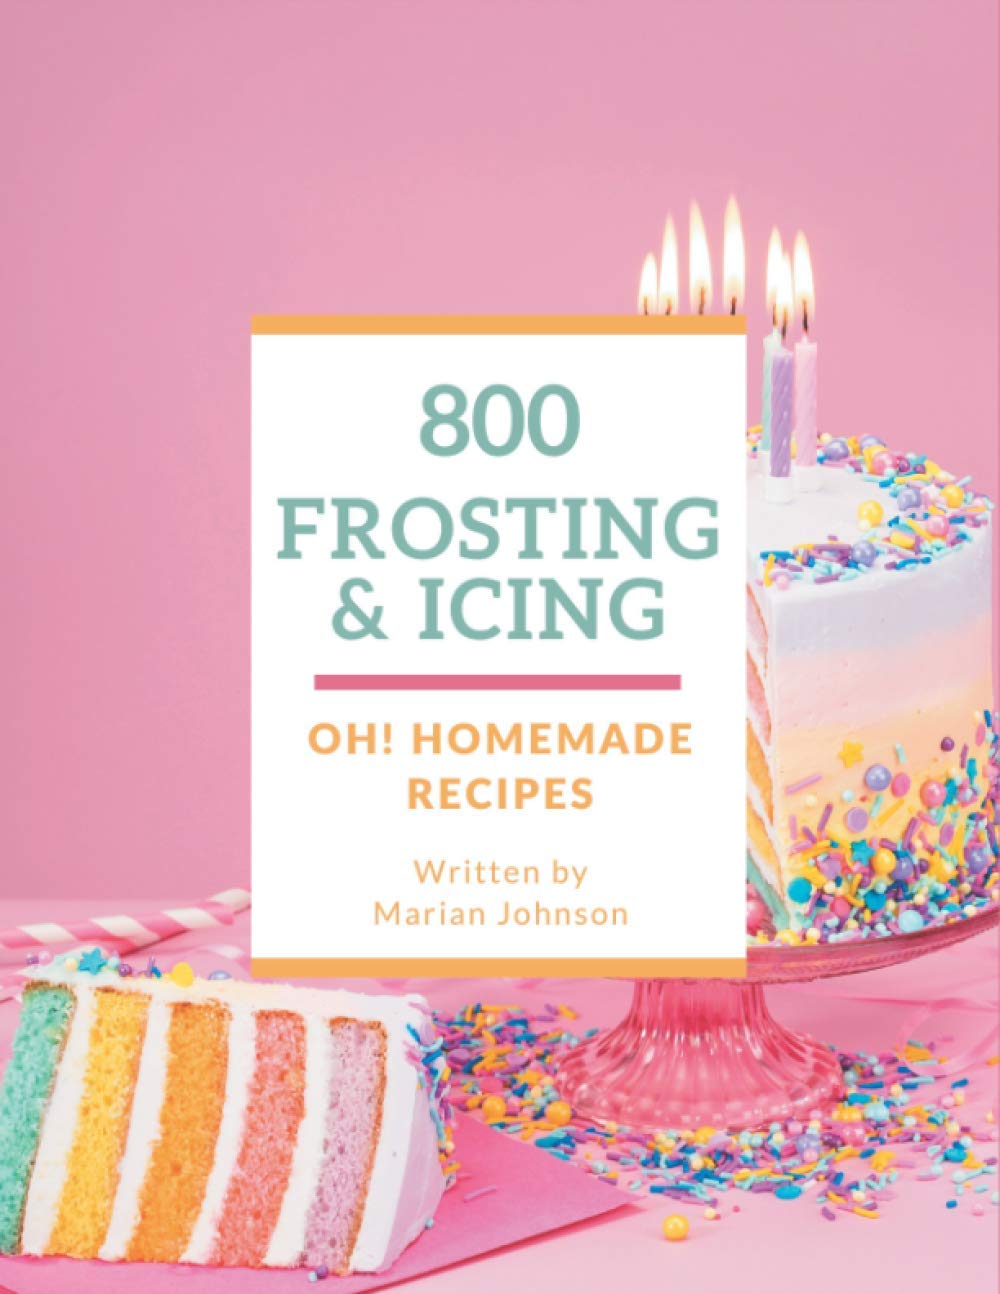 Oh! 800 Homemade Frosting and Icing Recipes: An Inspiring Homemade Frosting and Icing Cookbook for You